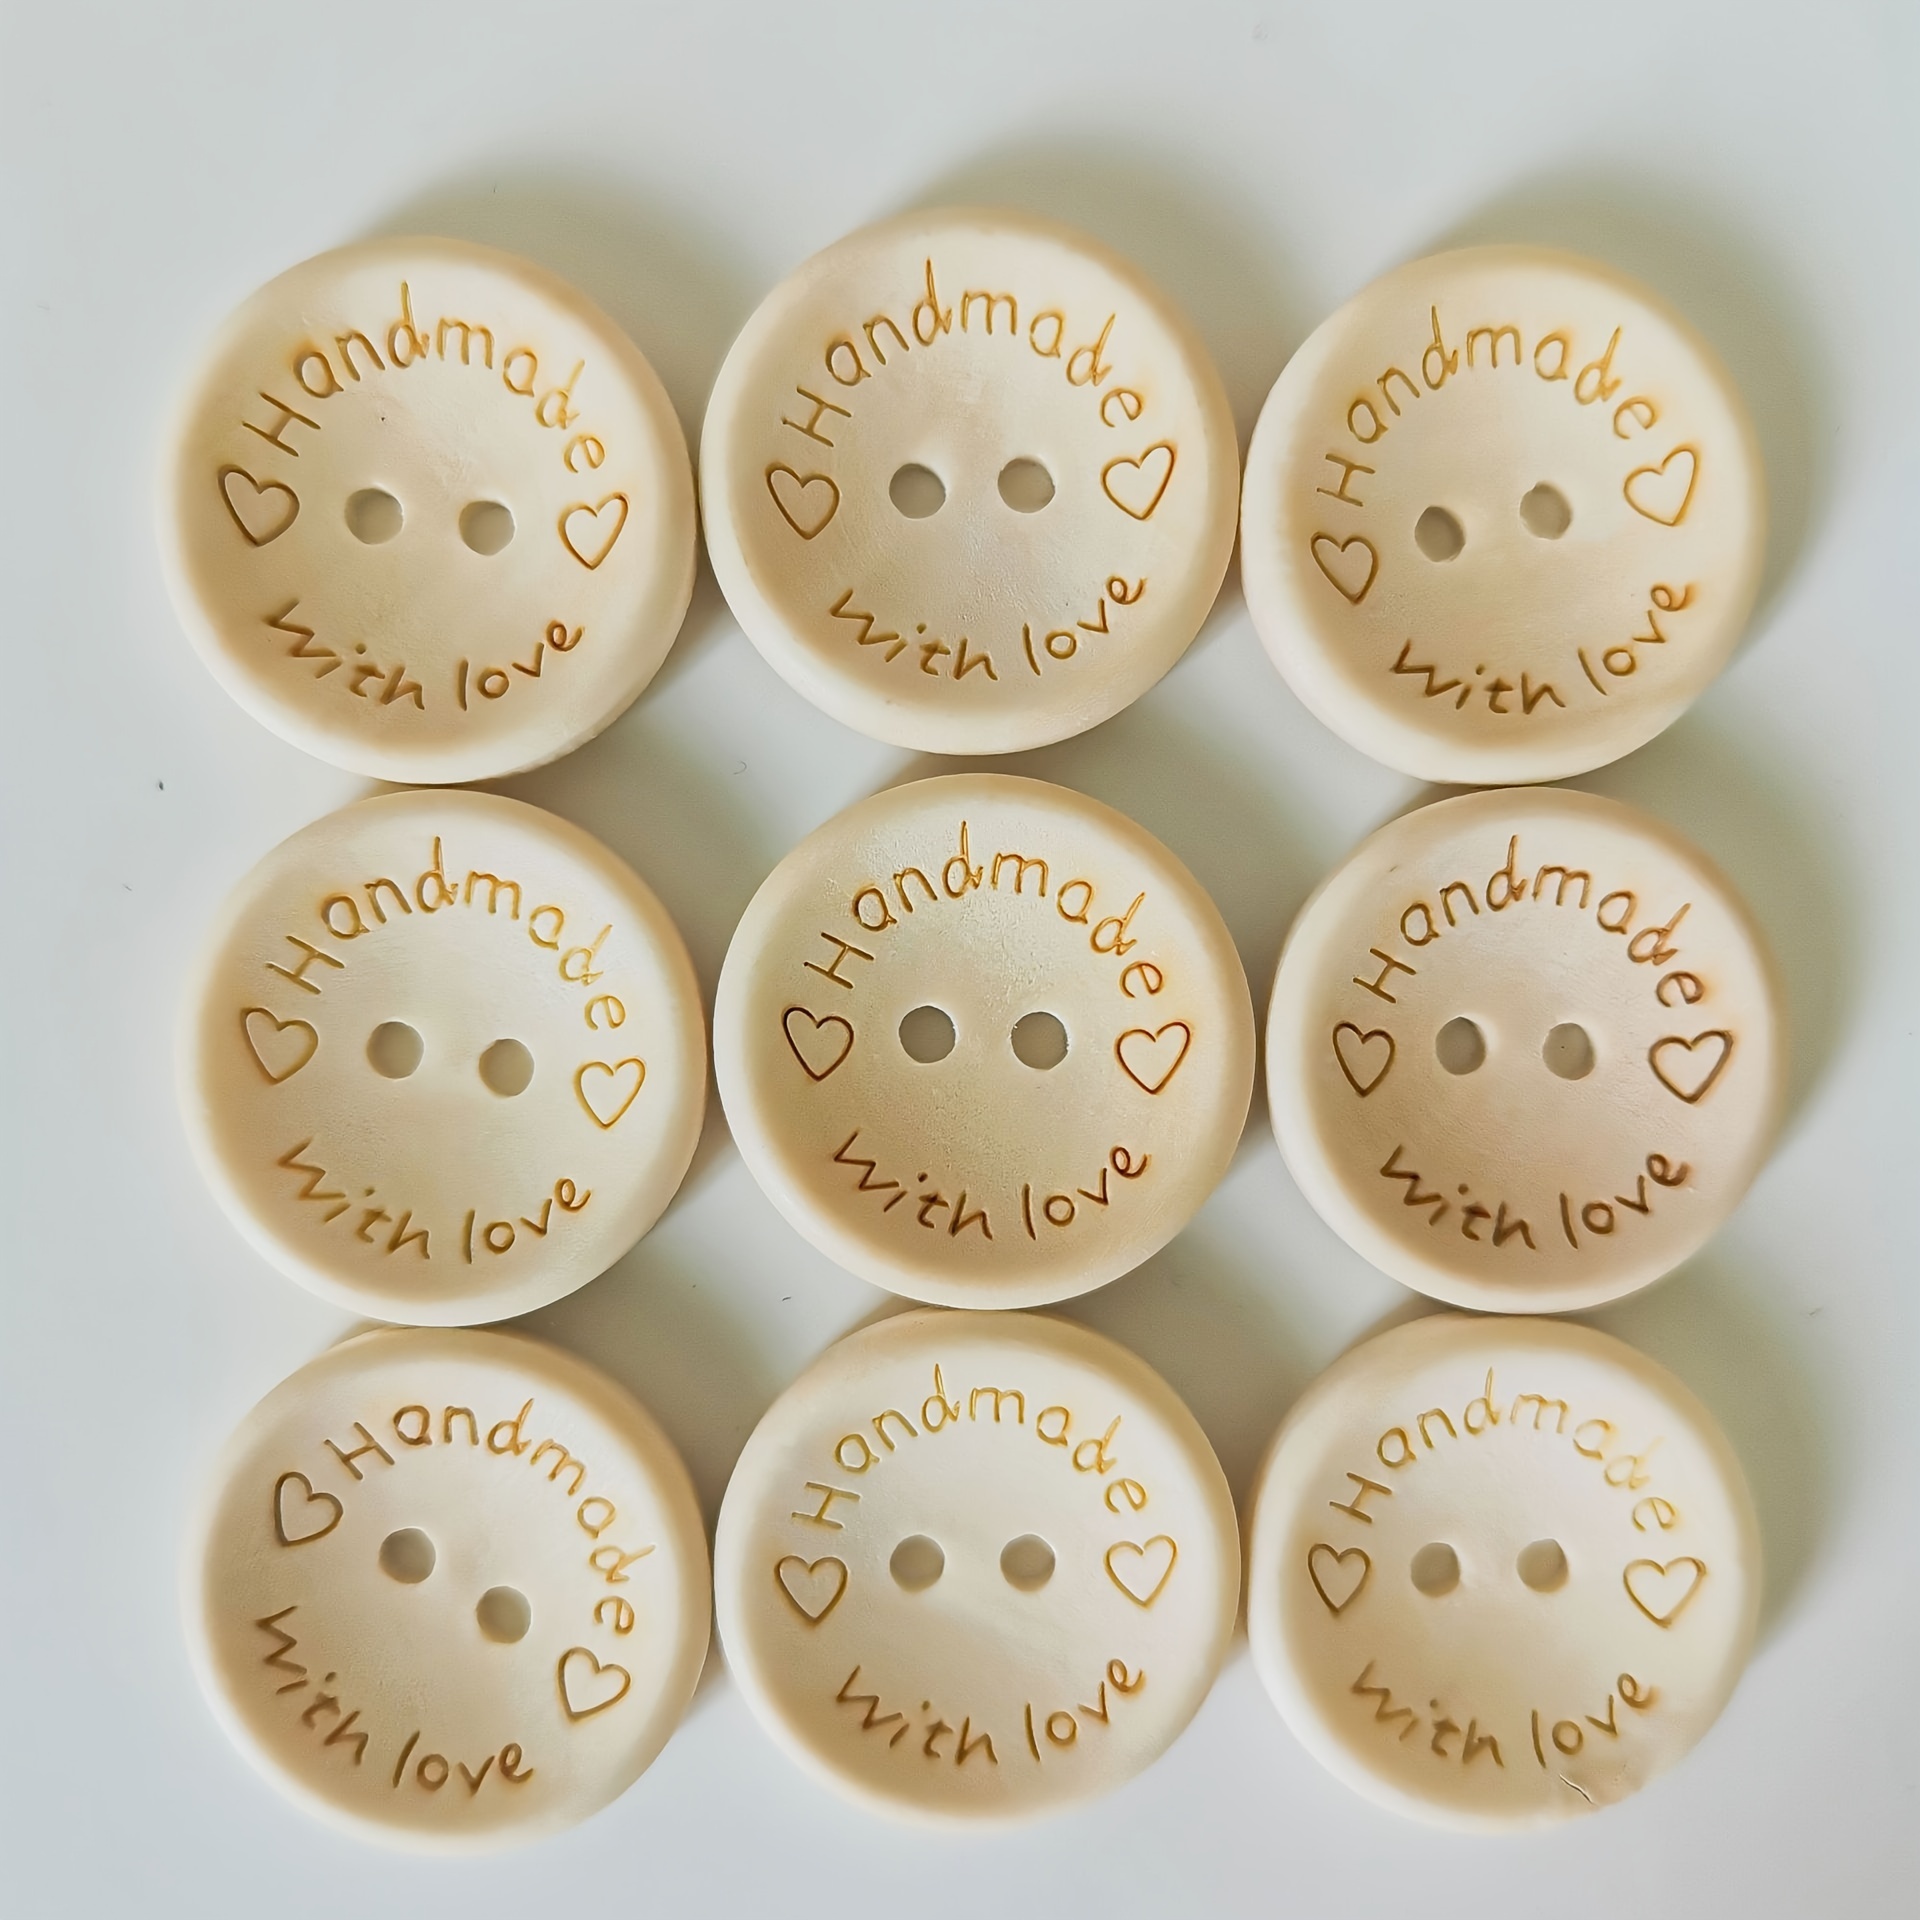 100pcs Natural Wooden Buttons Handmade with Love Wood Button for  Scrapbooking Craft DIY Baby Clothing Sewing Accessories - AliExpress